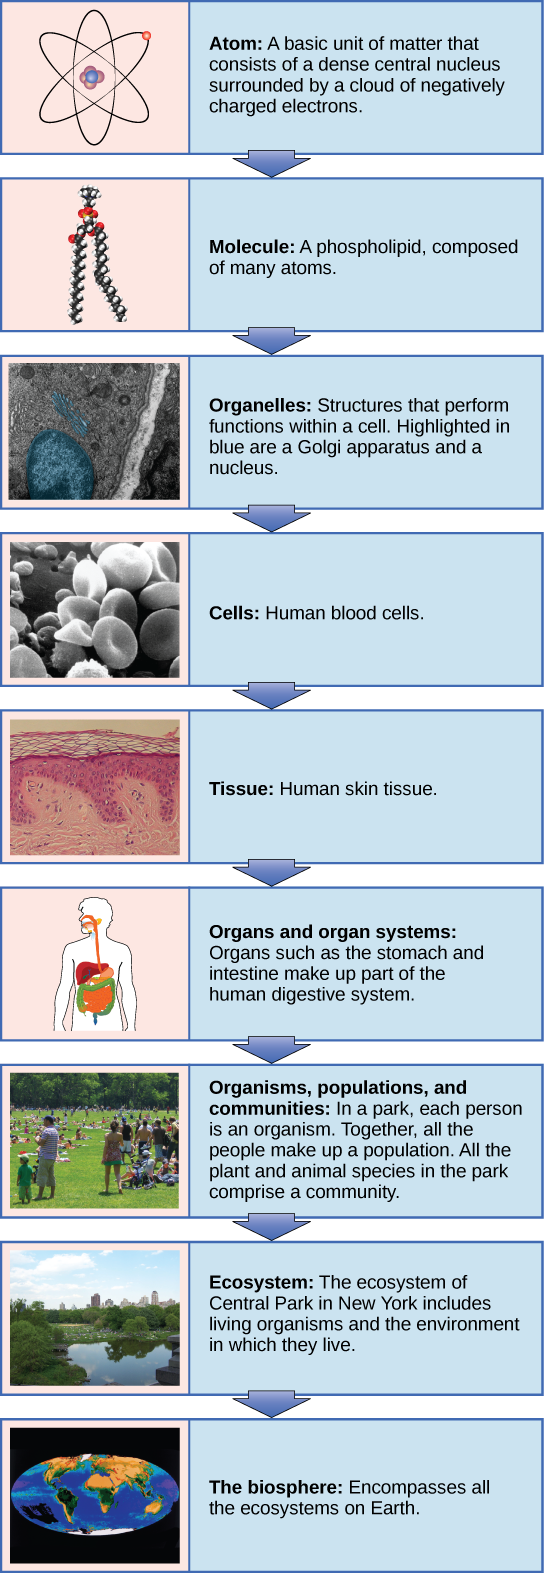 Vertical Chart showing the levels of organization of living things. Starts with an atom, then molecule, cell, organelle, tissue, organ and organ system, then organisms, populations & communities, to ecosystem, and ending with biosphere.